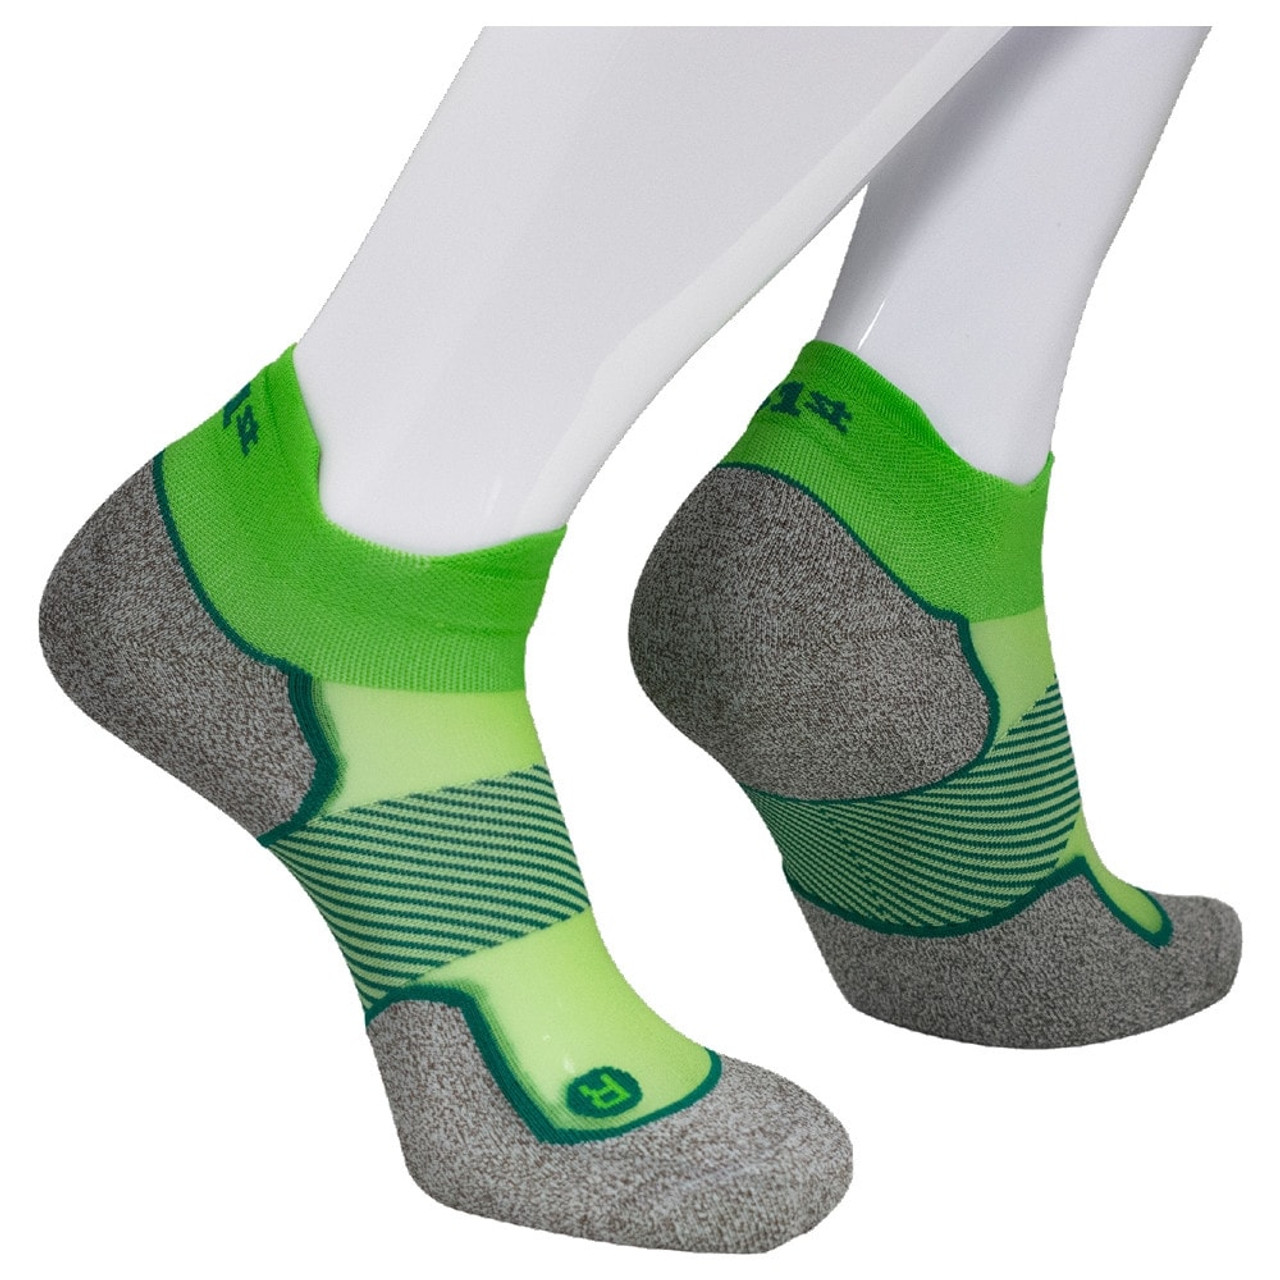 OS1st Pickleball No Show Socks | Free Shipping Offer!